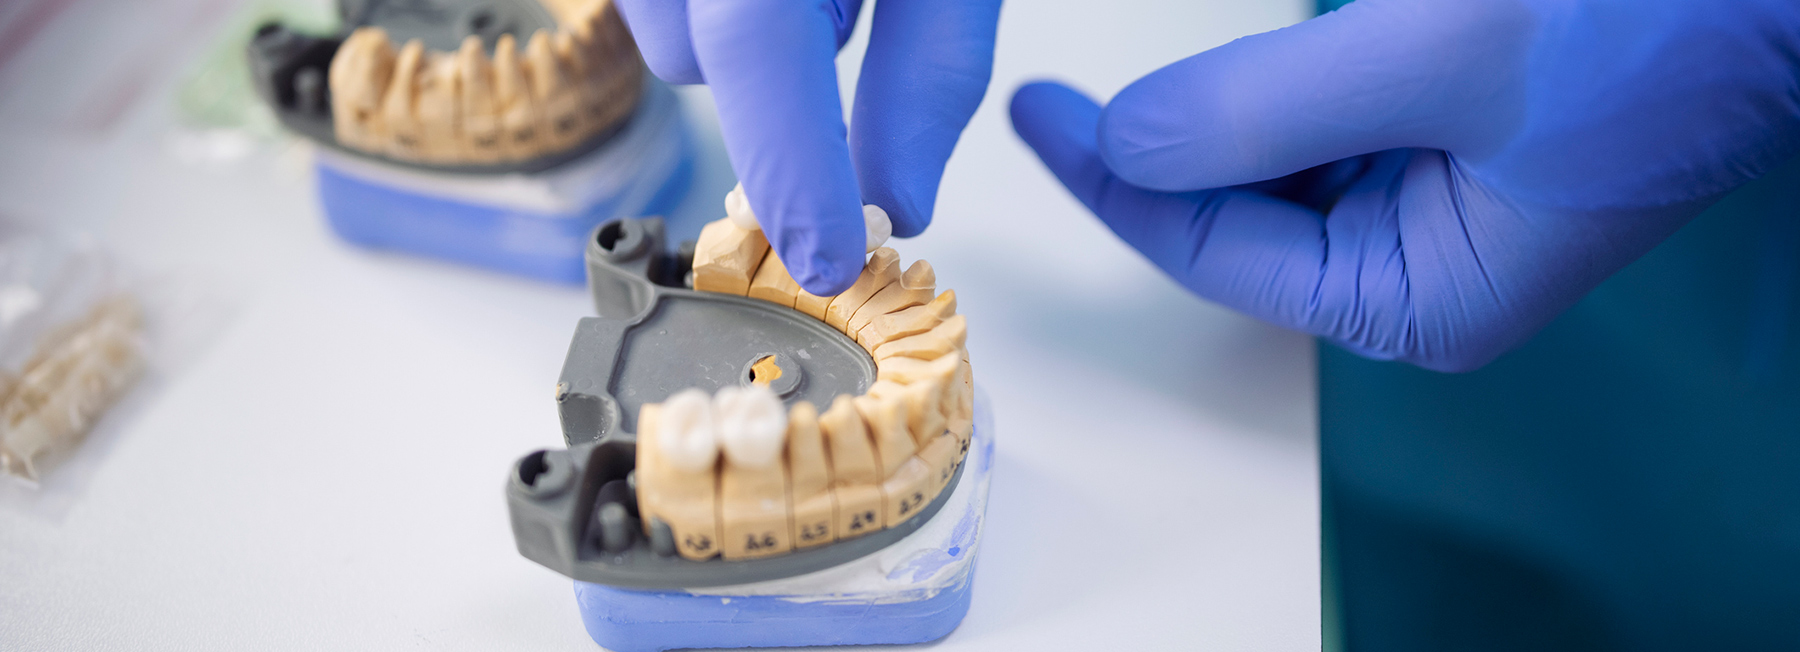 We provide a wide array of dental services and treatments, including dental crowns.